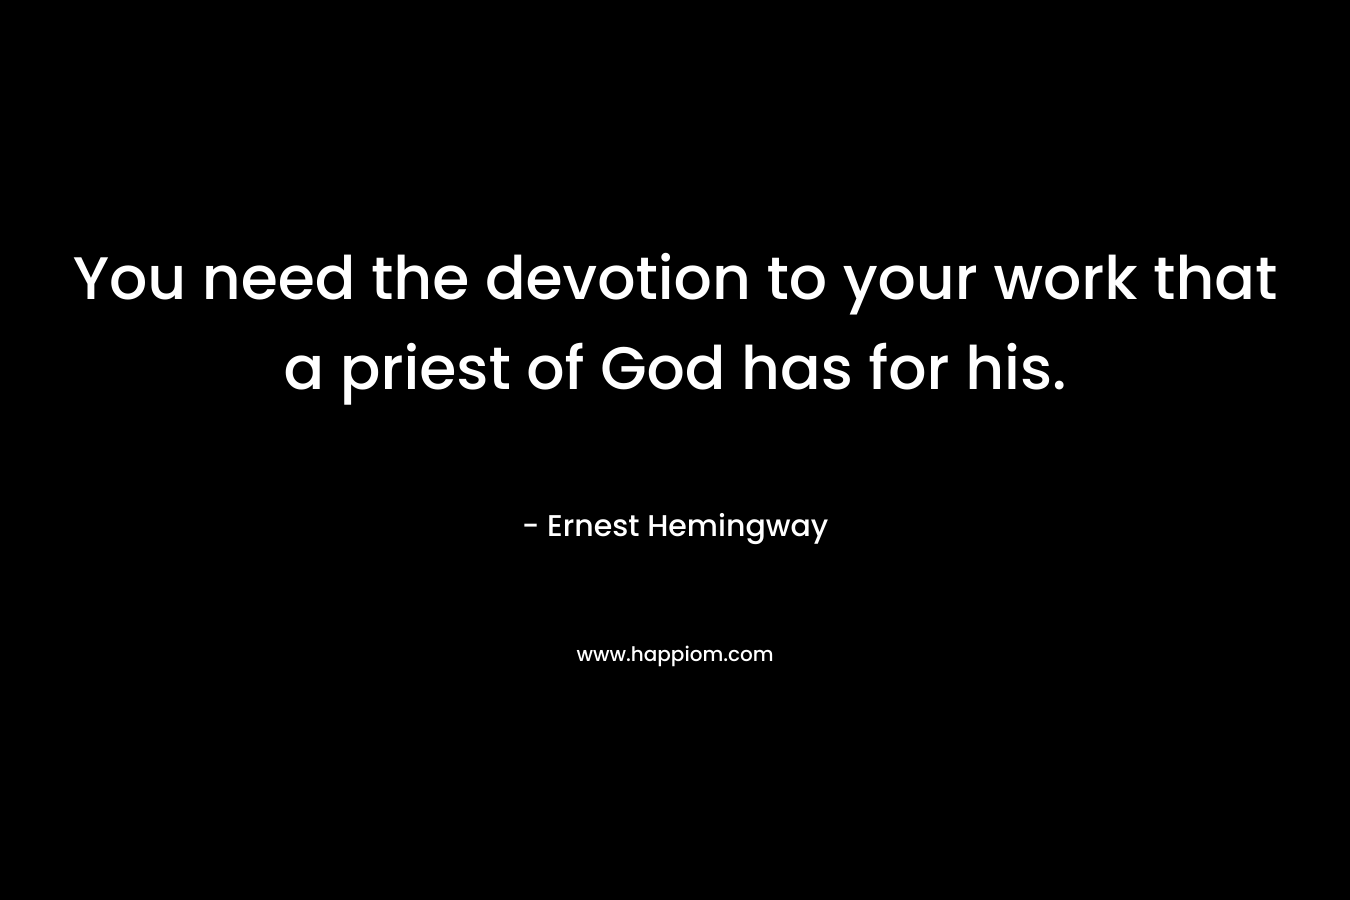 You need the devotion to your work that a priest of God has for his.